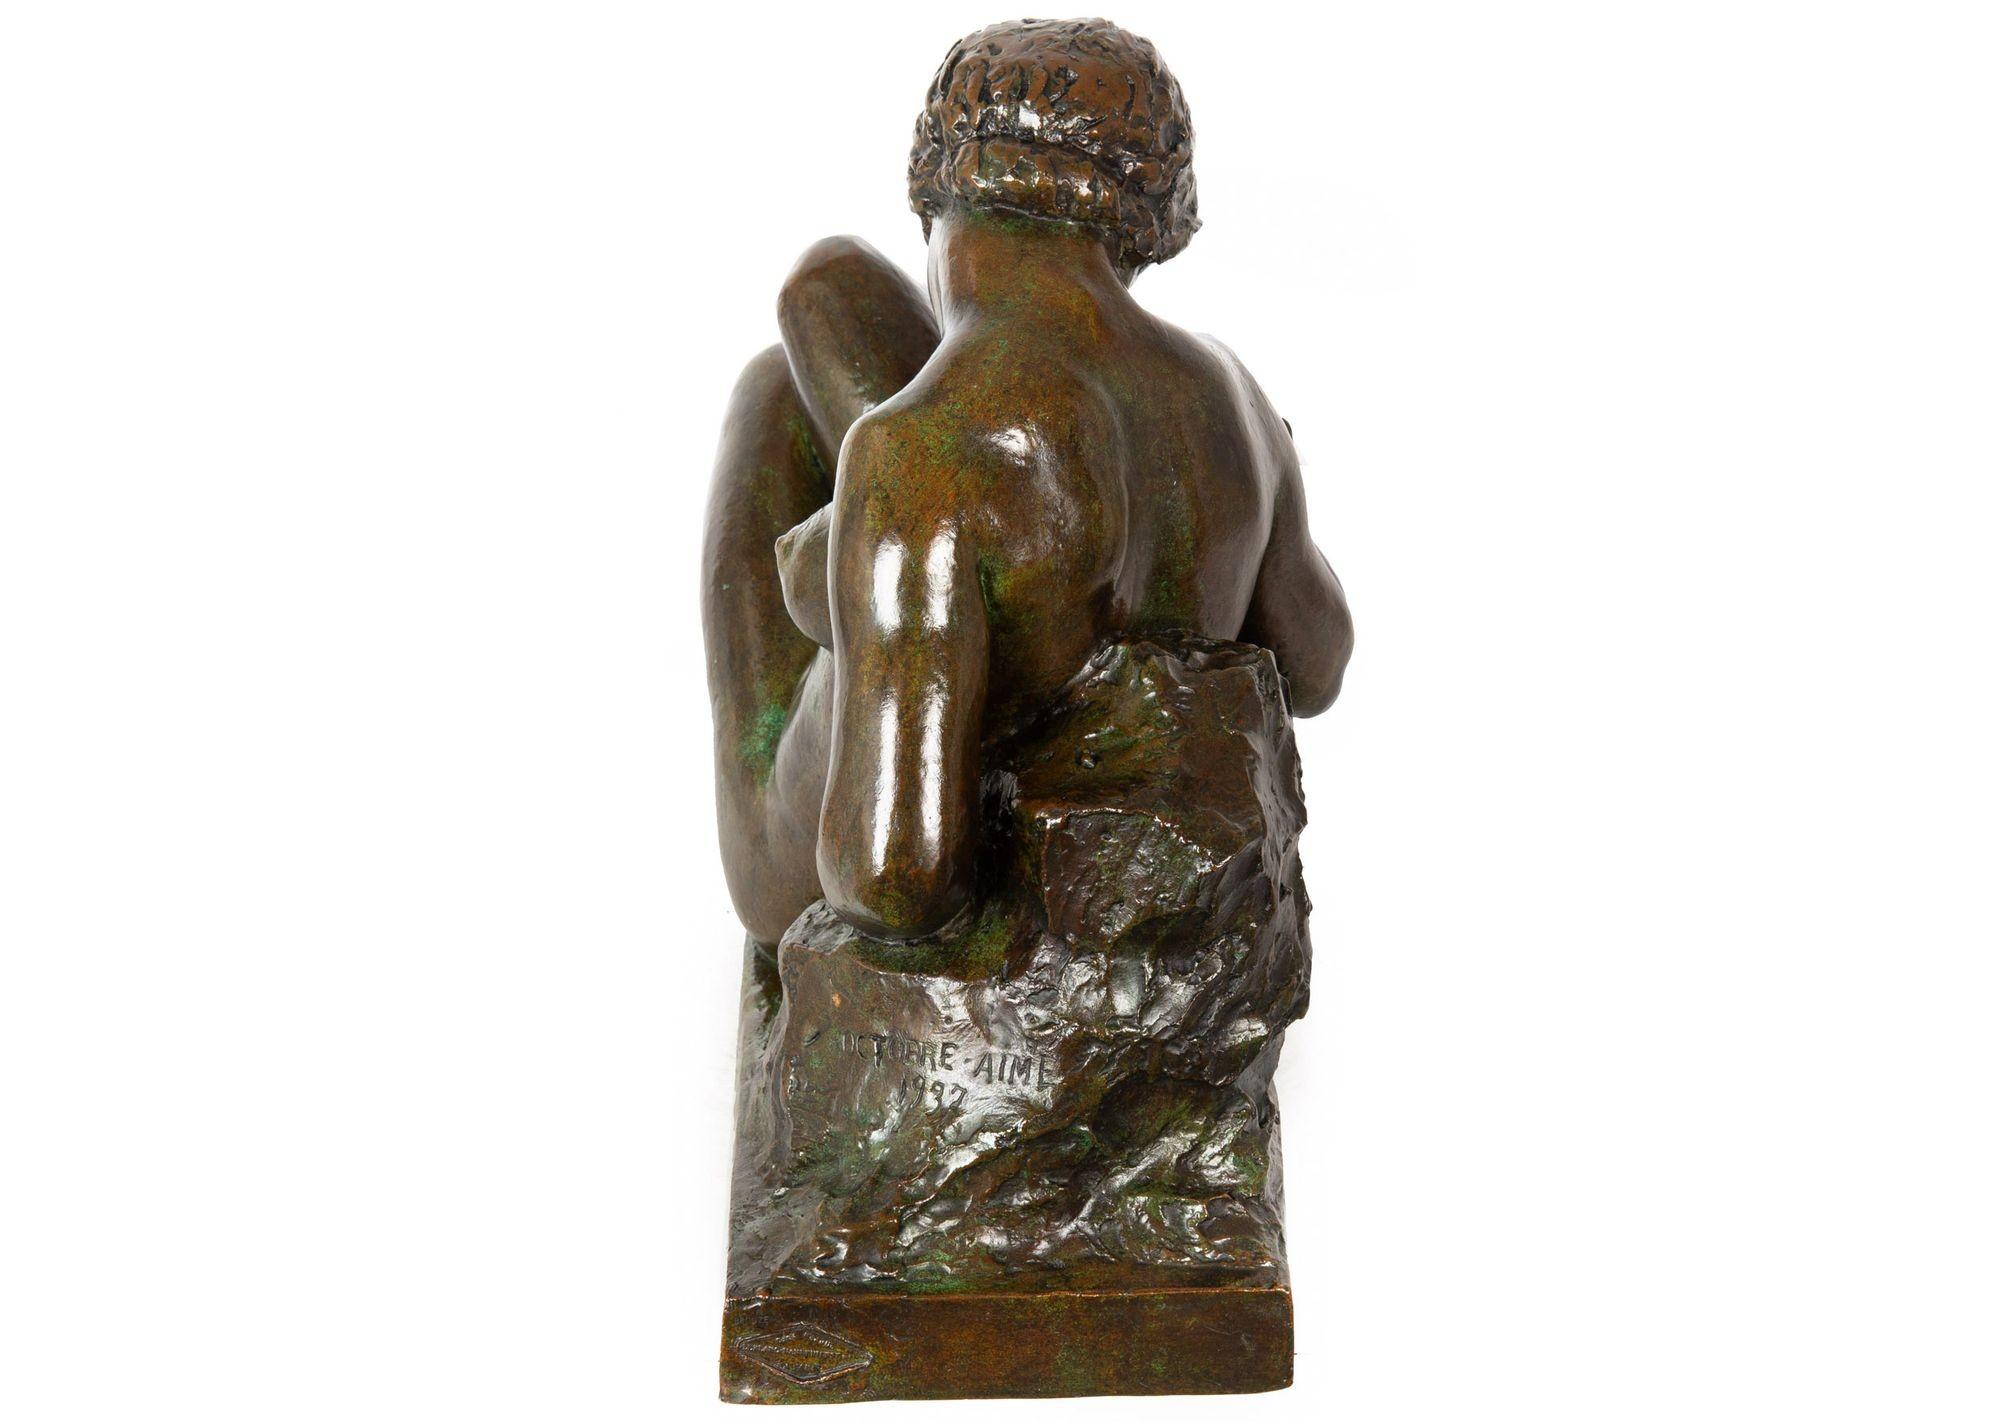 Rare French Modernist Bronze Sculpture of “Eve” (1937) by Aime Octobre For Sale 1